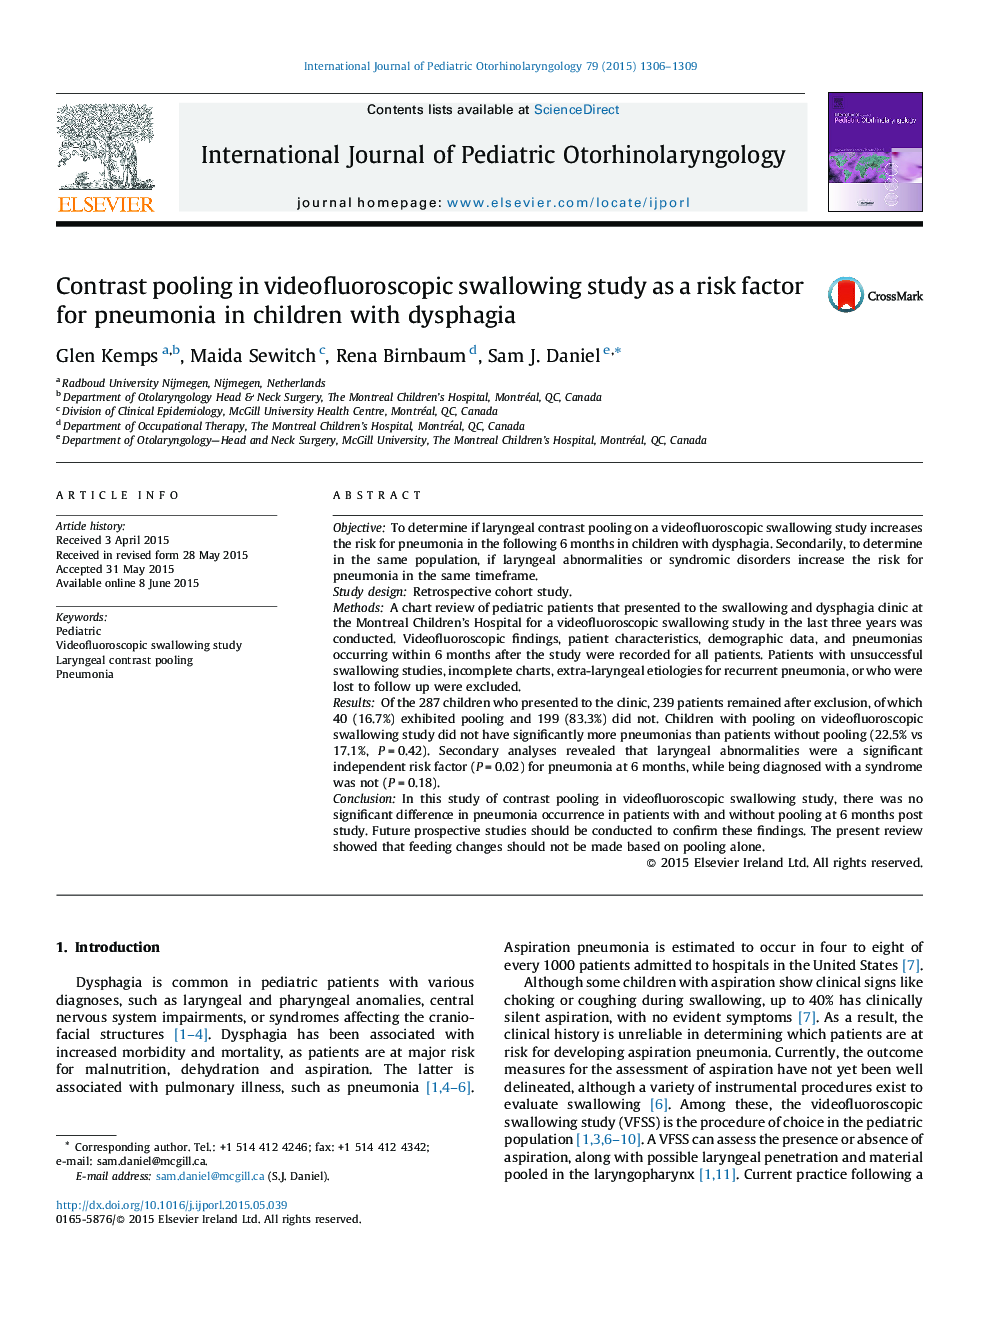 Contrast pooling in videofluoroscopic swallowing study as a risk factor for pneumonia in children with dysphagia